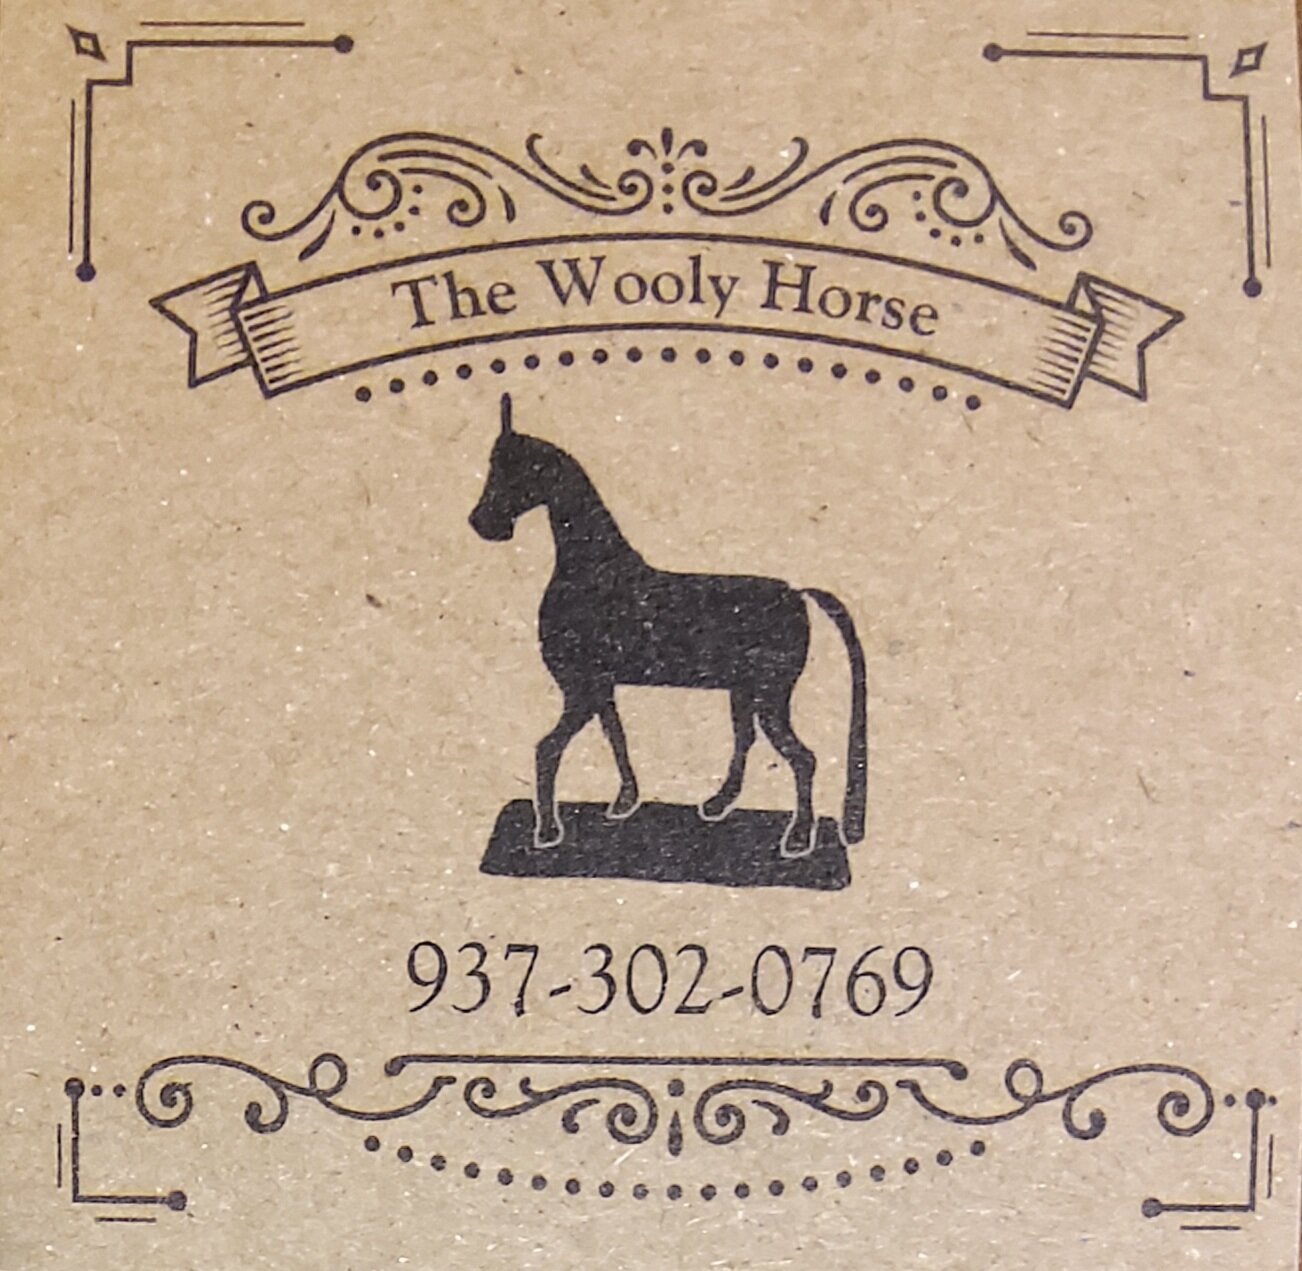 The Wooly Horse